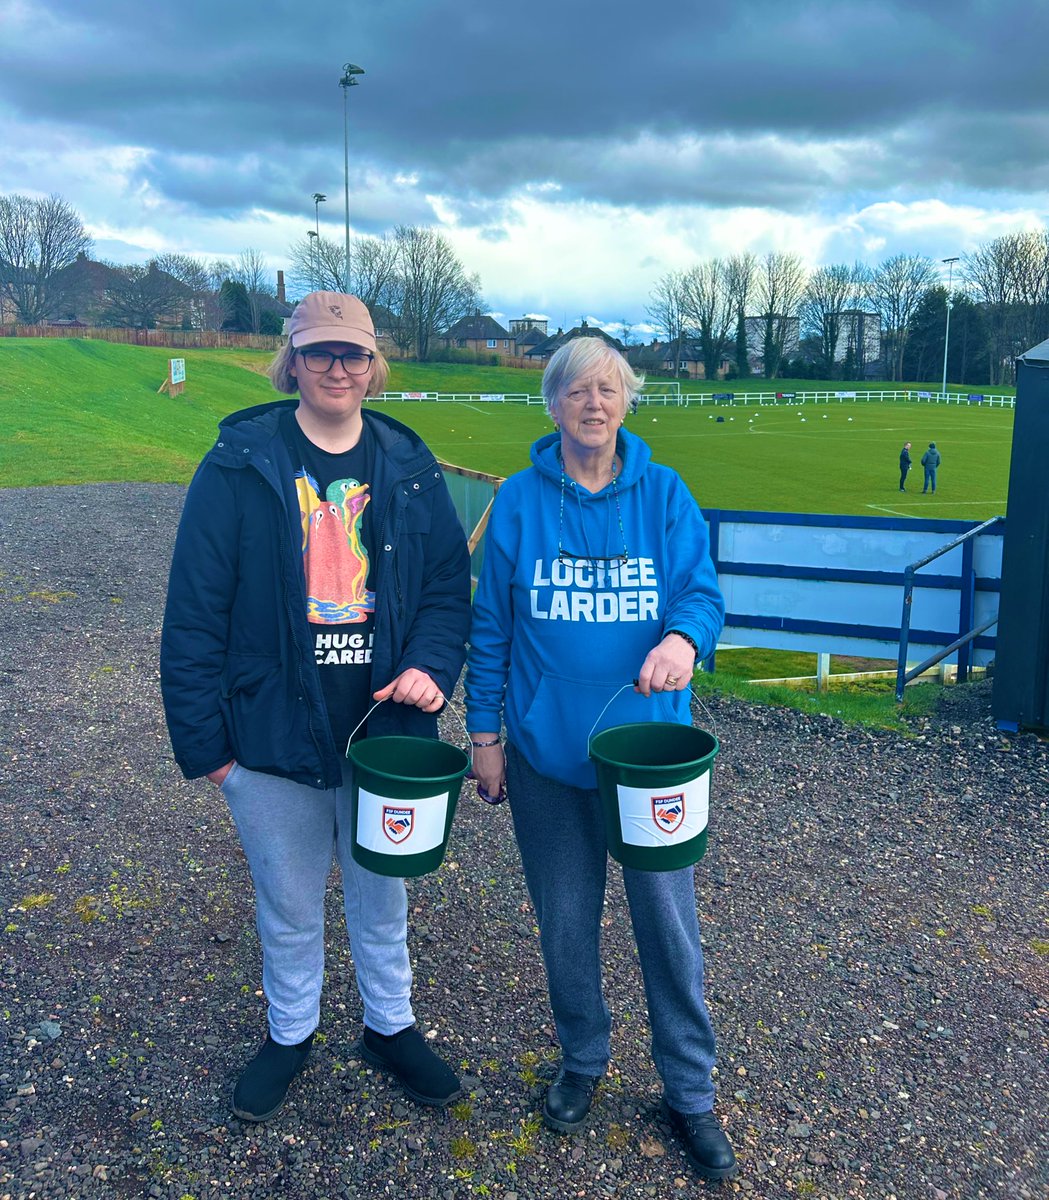 Thanks to everyone who donated to our collection at the Lochee derby today! We also raised £122.87 for Lochee Community Larder in our collection buckets! 🤝 @LocheeUnitedJFC @LocheeHarpJFC